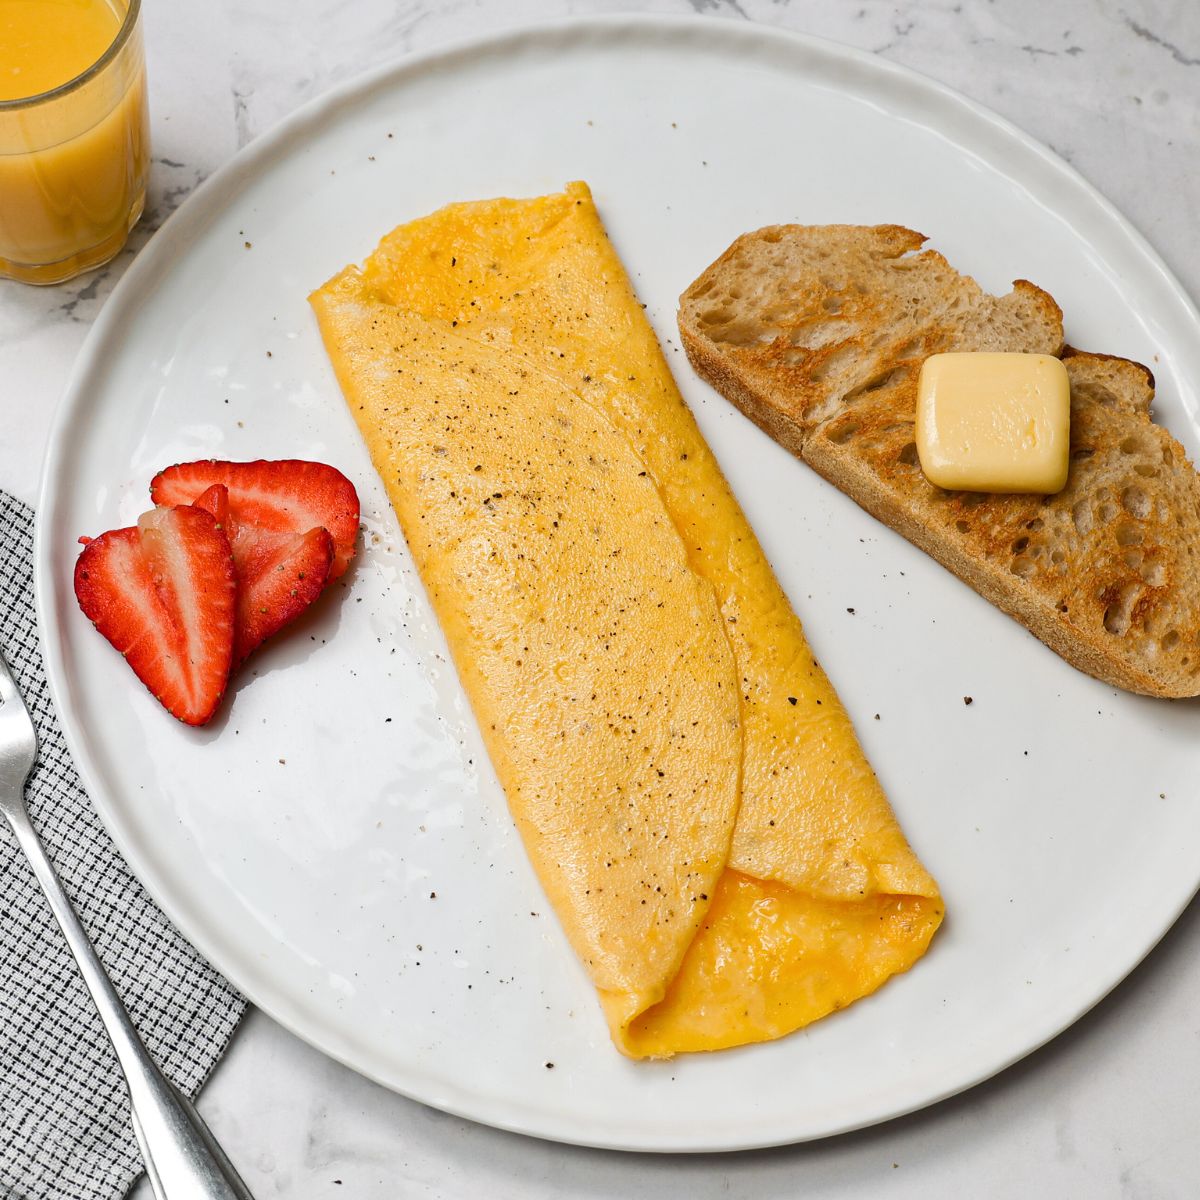 Omelet on plate with toast and berries.